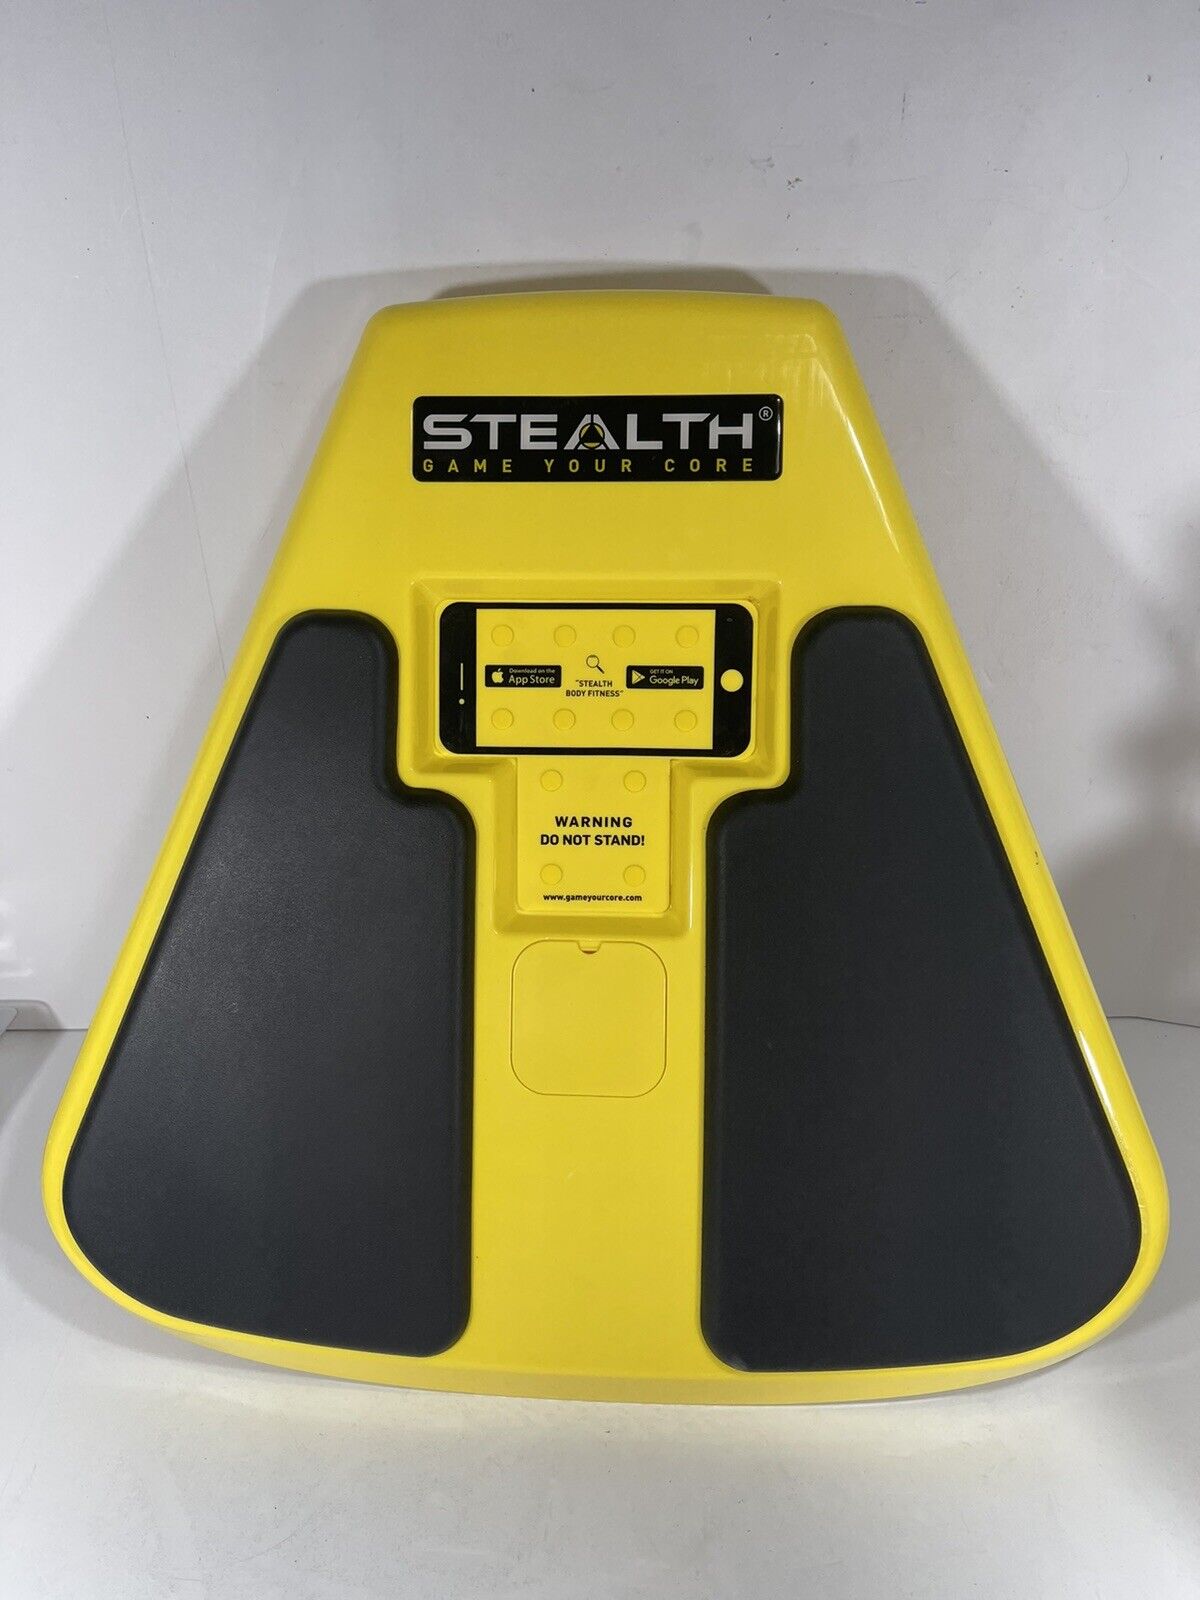 Stealth Trainer Ab/Core Gaming Exercise Equipment Excellent